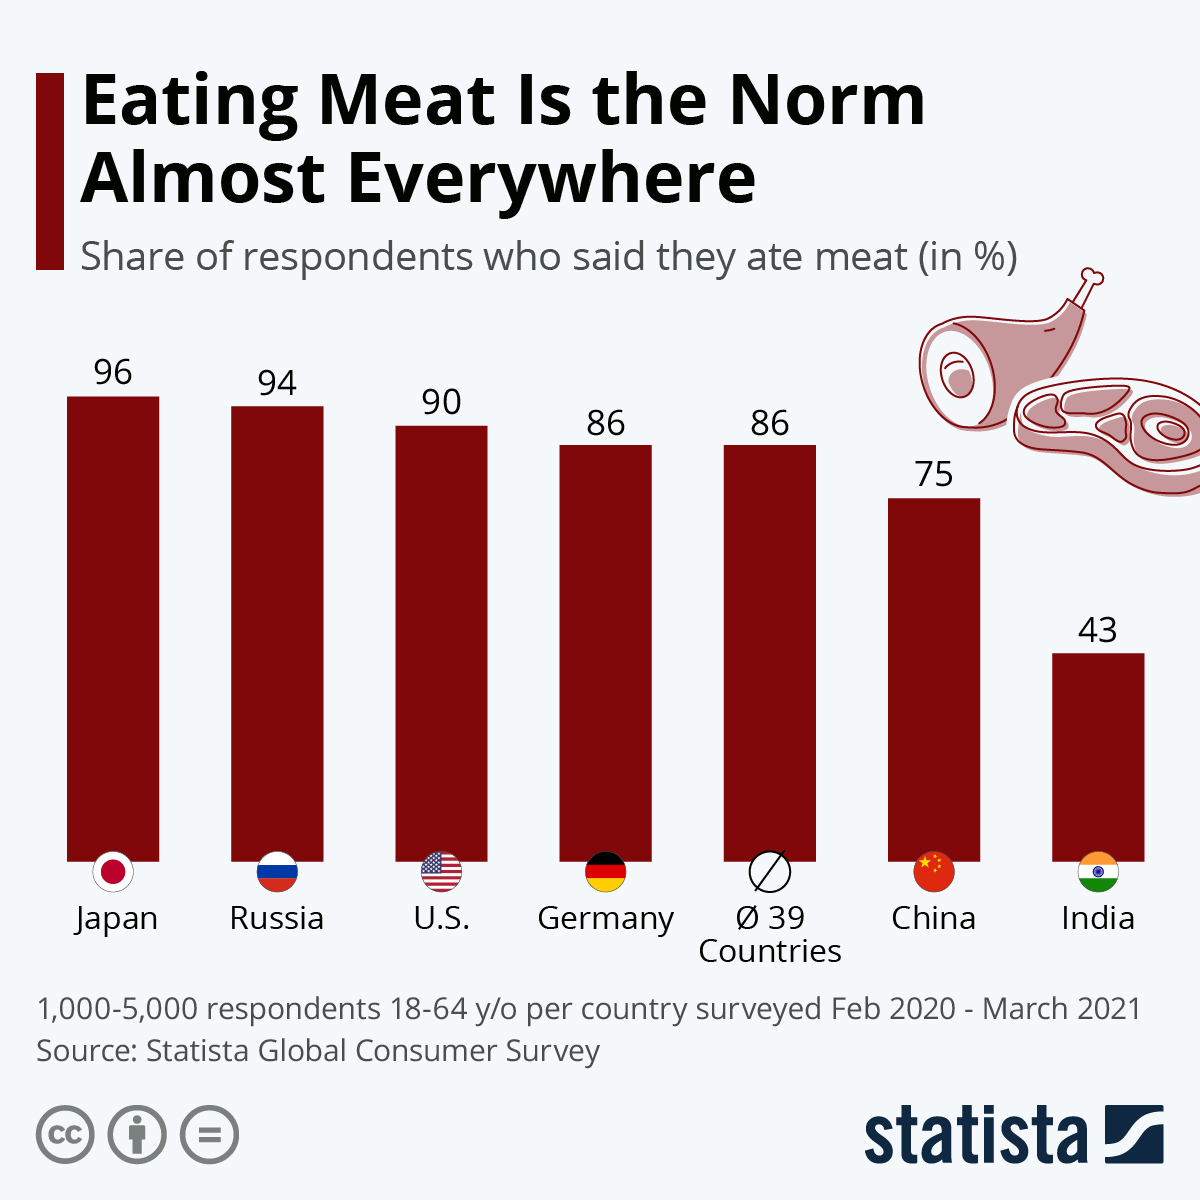 Eating meat remains a norm throughout the world